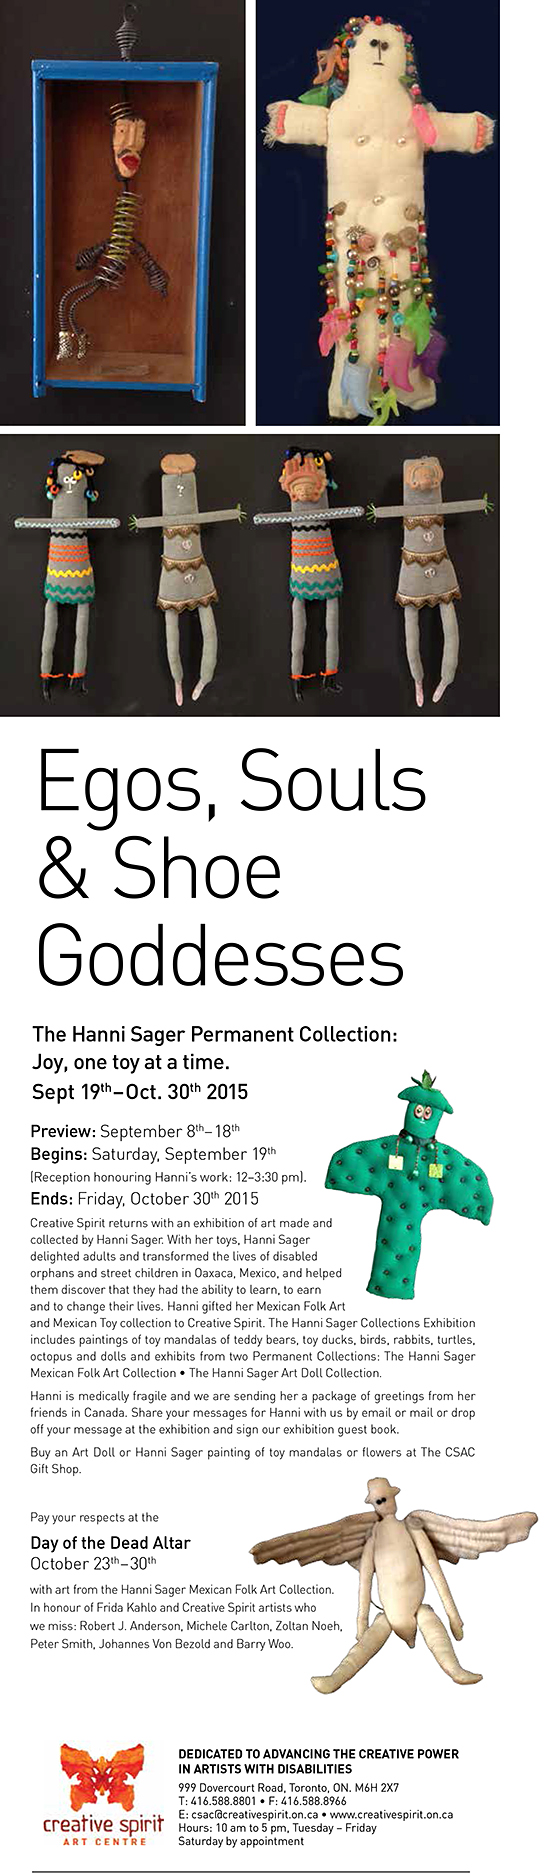 Hanni Sager Permanent Collection Event - Preview Sep.8th to 18th, Reception: Saturday September 19th 12 to 3:30 pm, Ends October 30th, 2015.